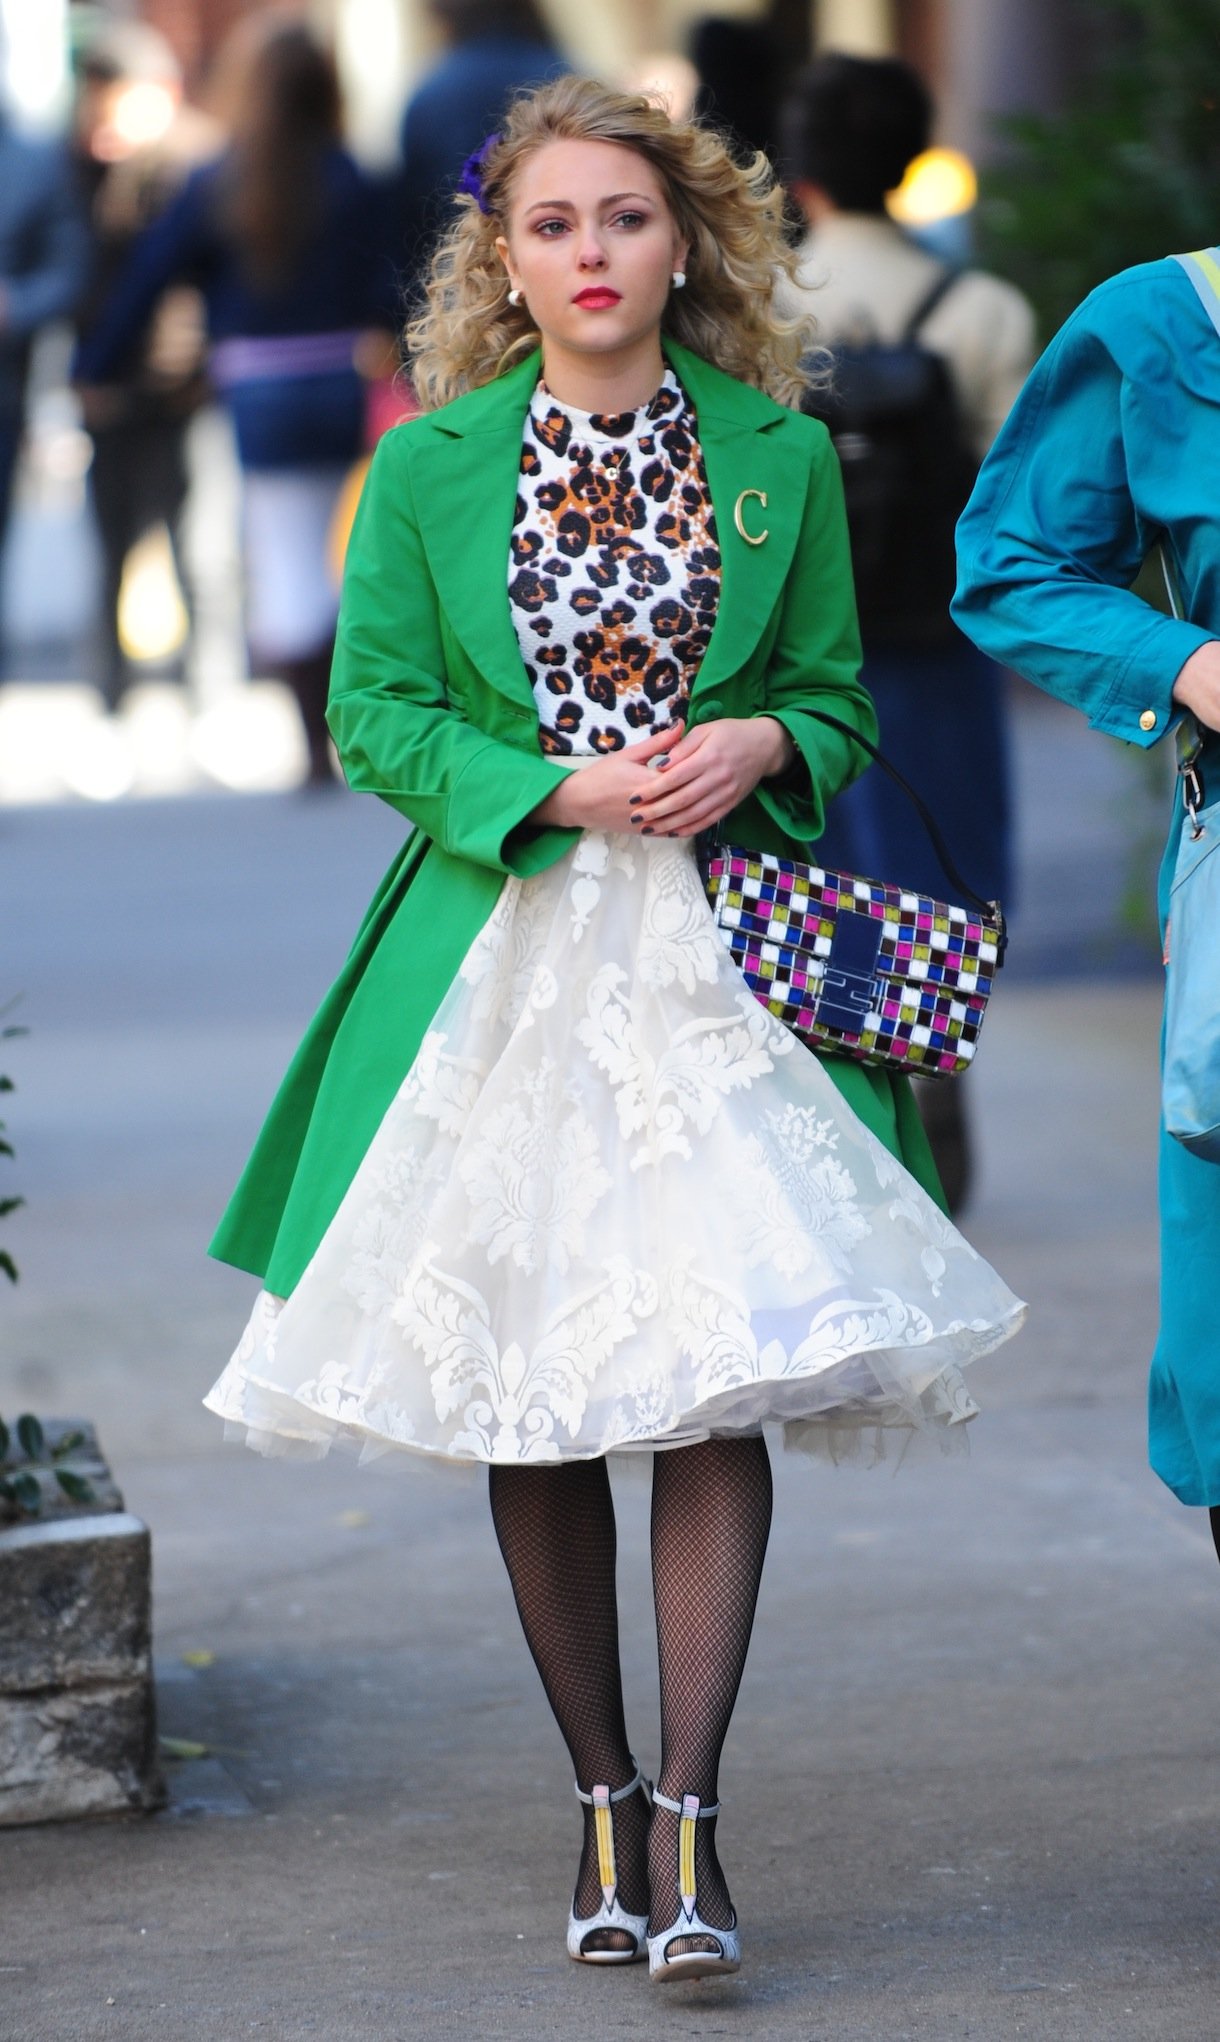 Actress AnnaSophia Robb is seen on the set of 'The Carrie Diaries'